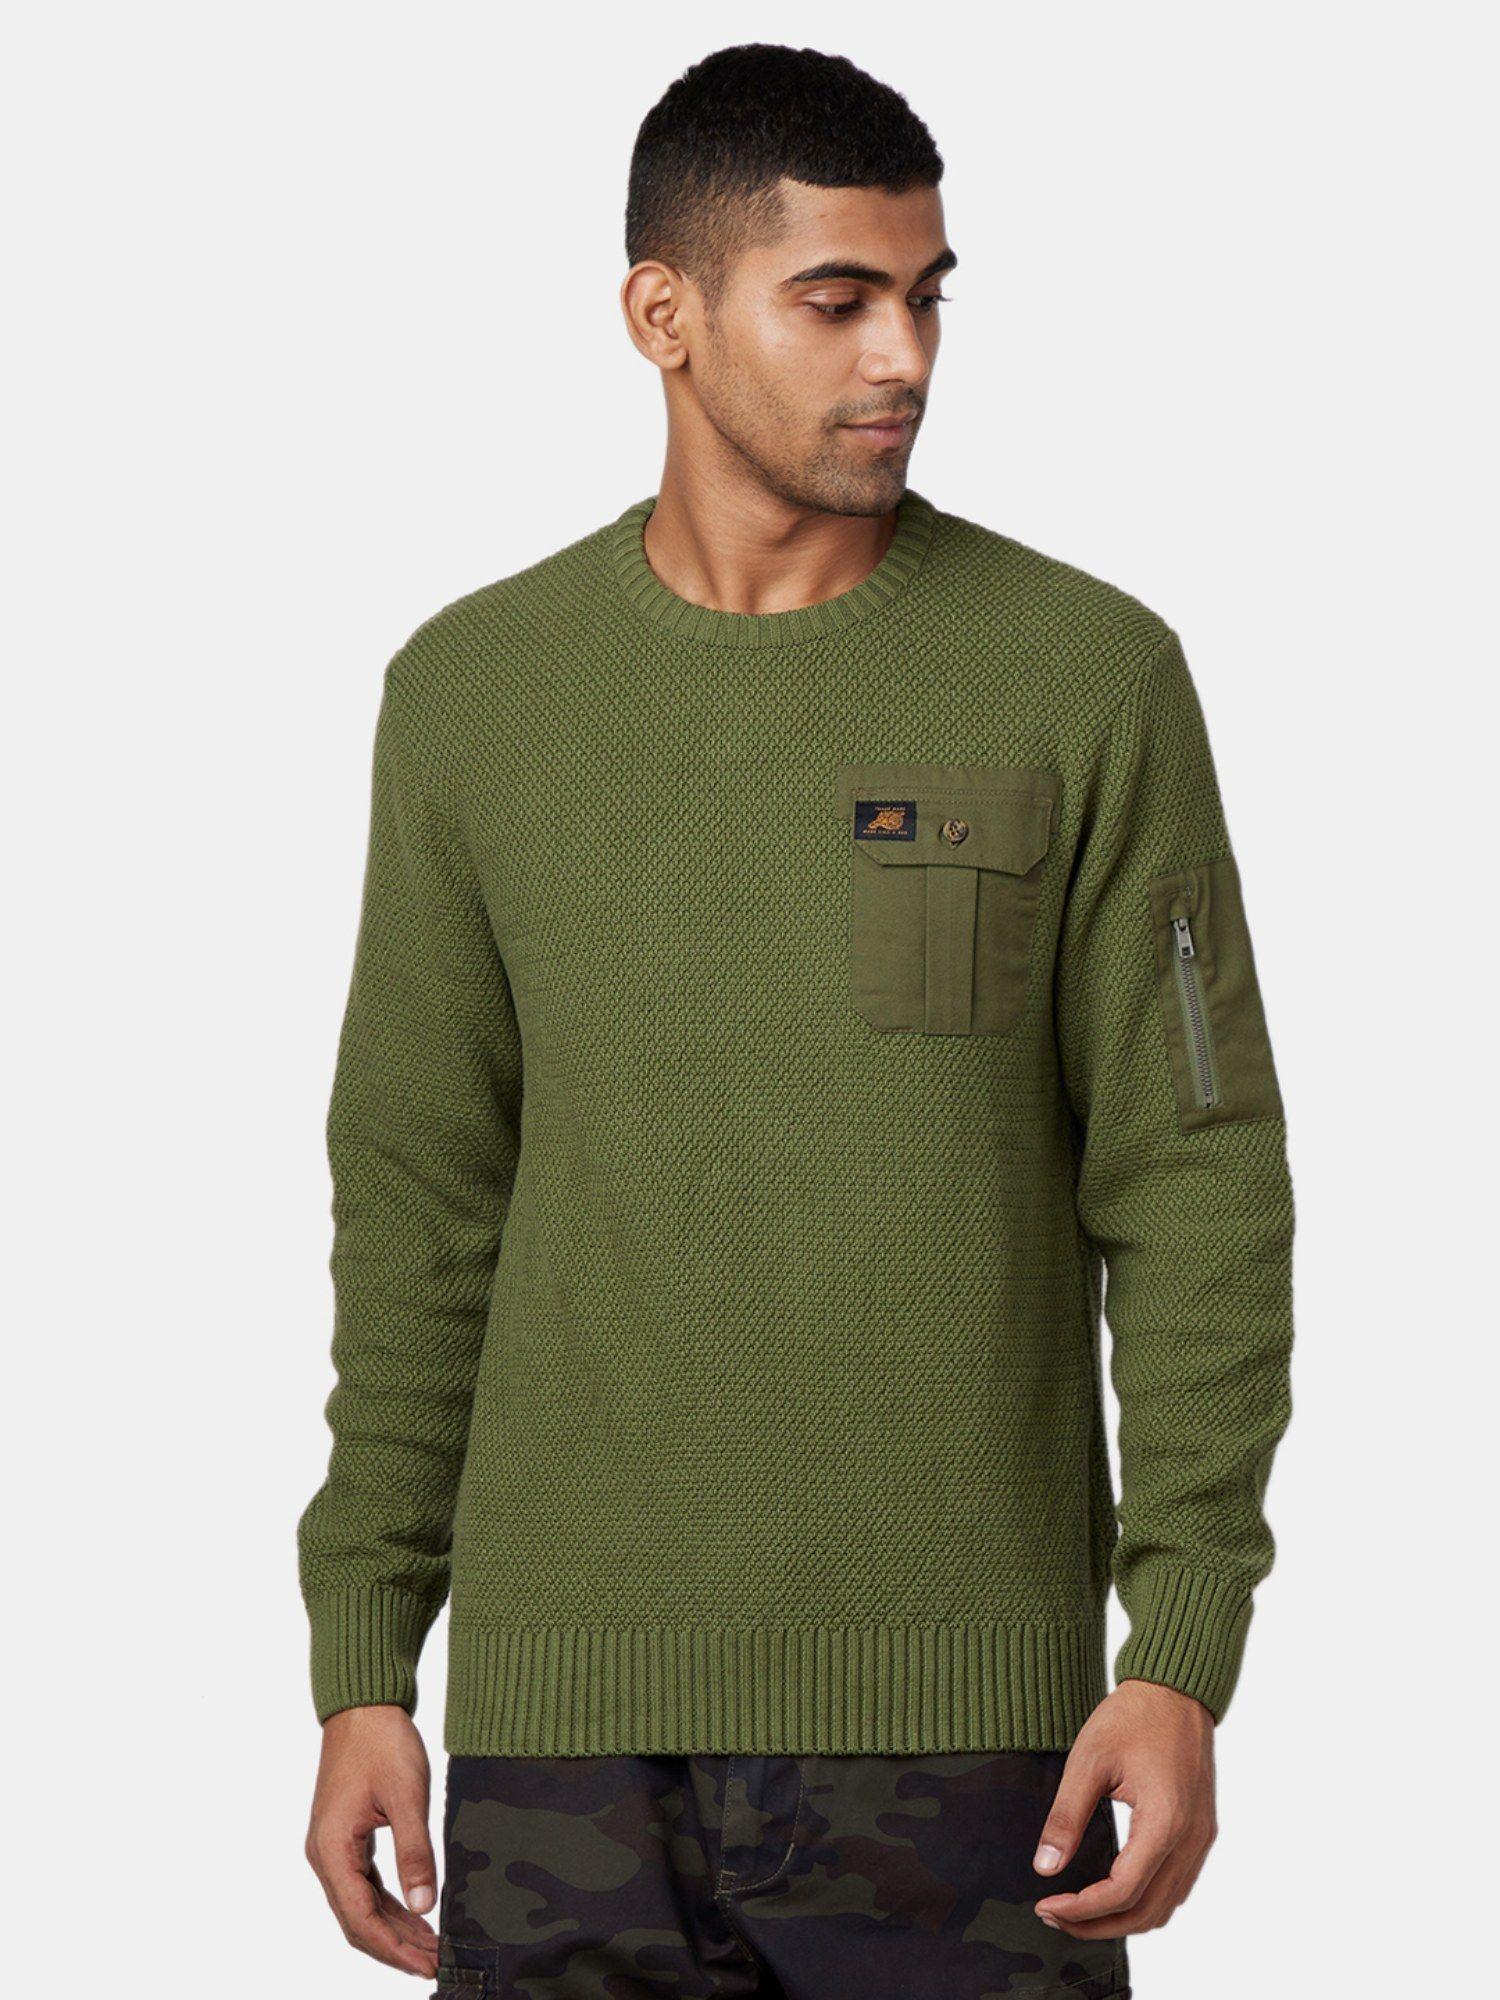 military-olive-sweater